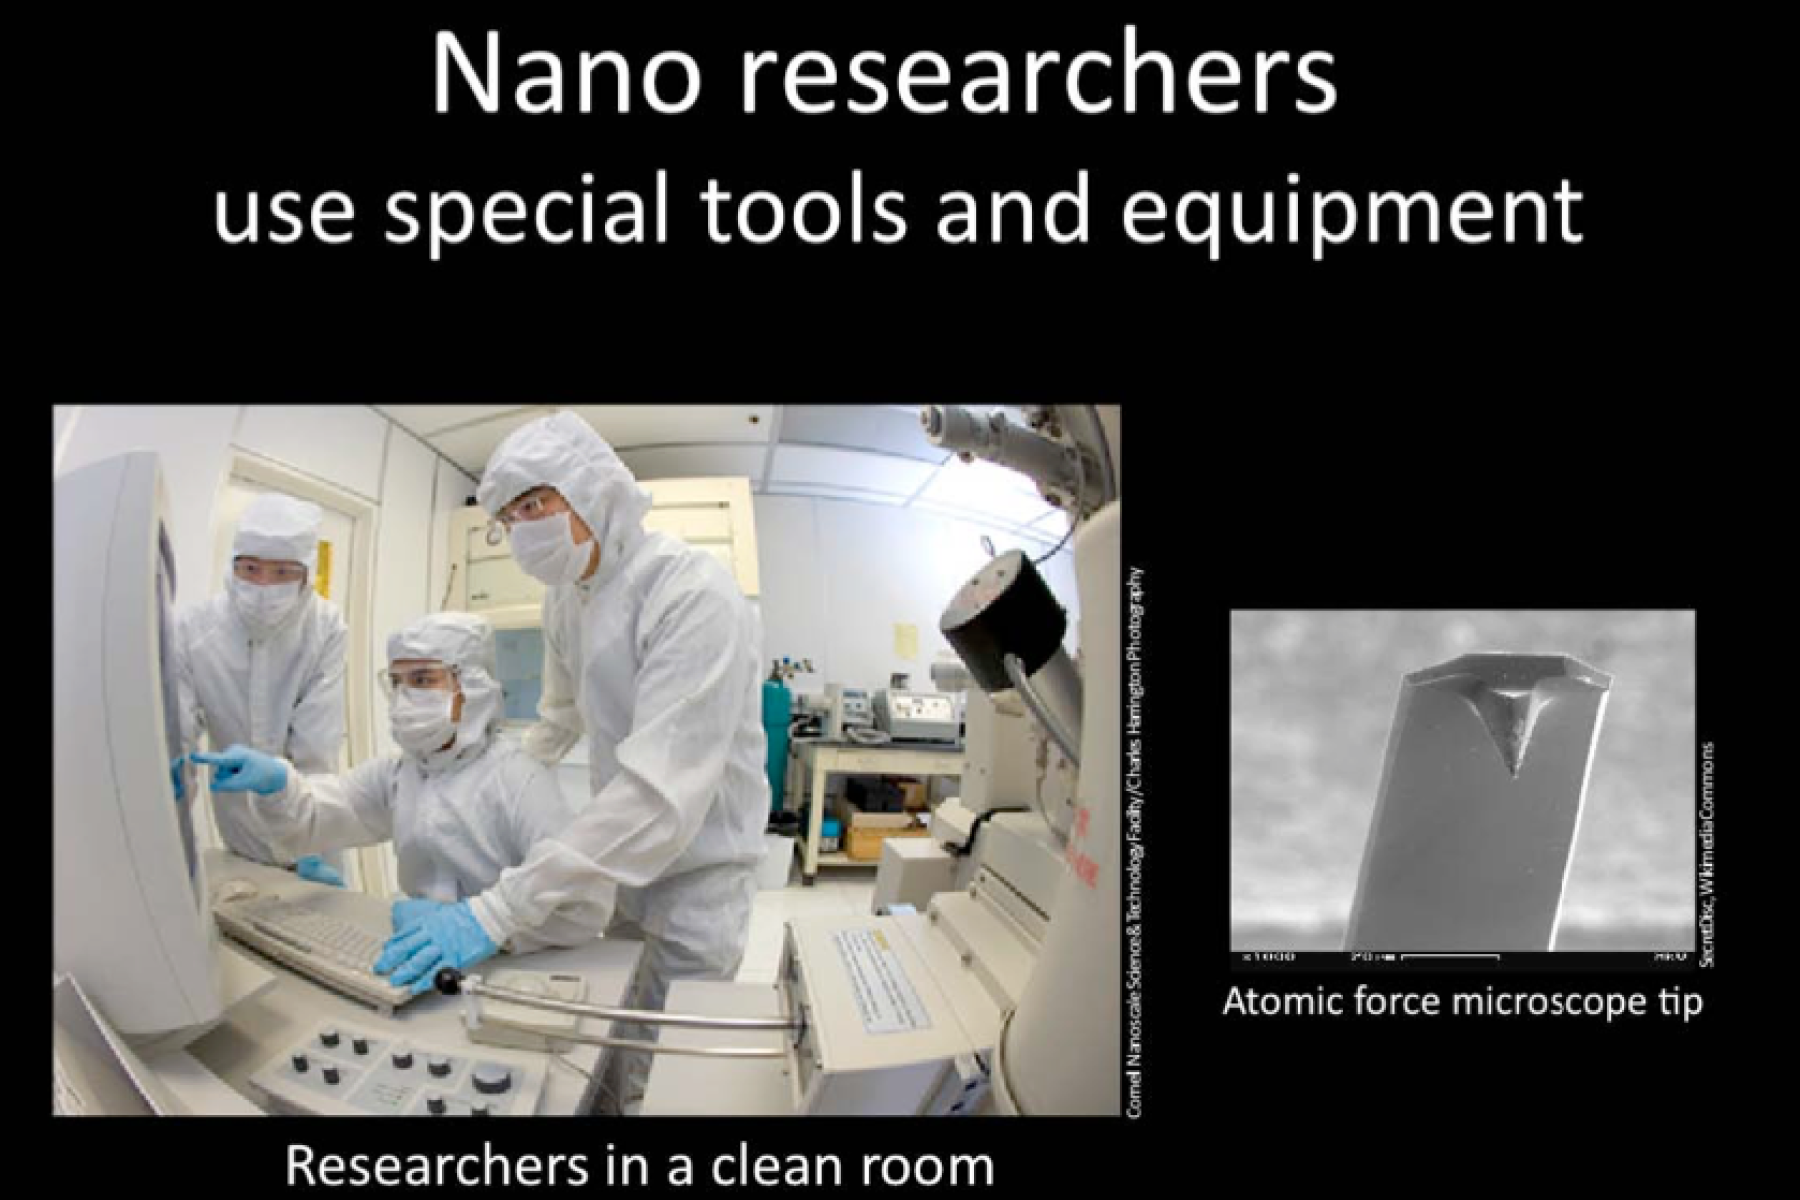 Nano 101 slide presentation showing how scientists use special tools